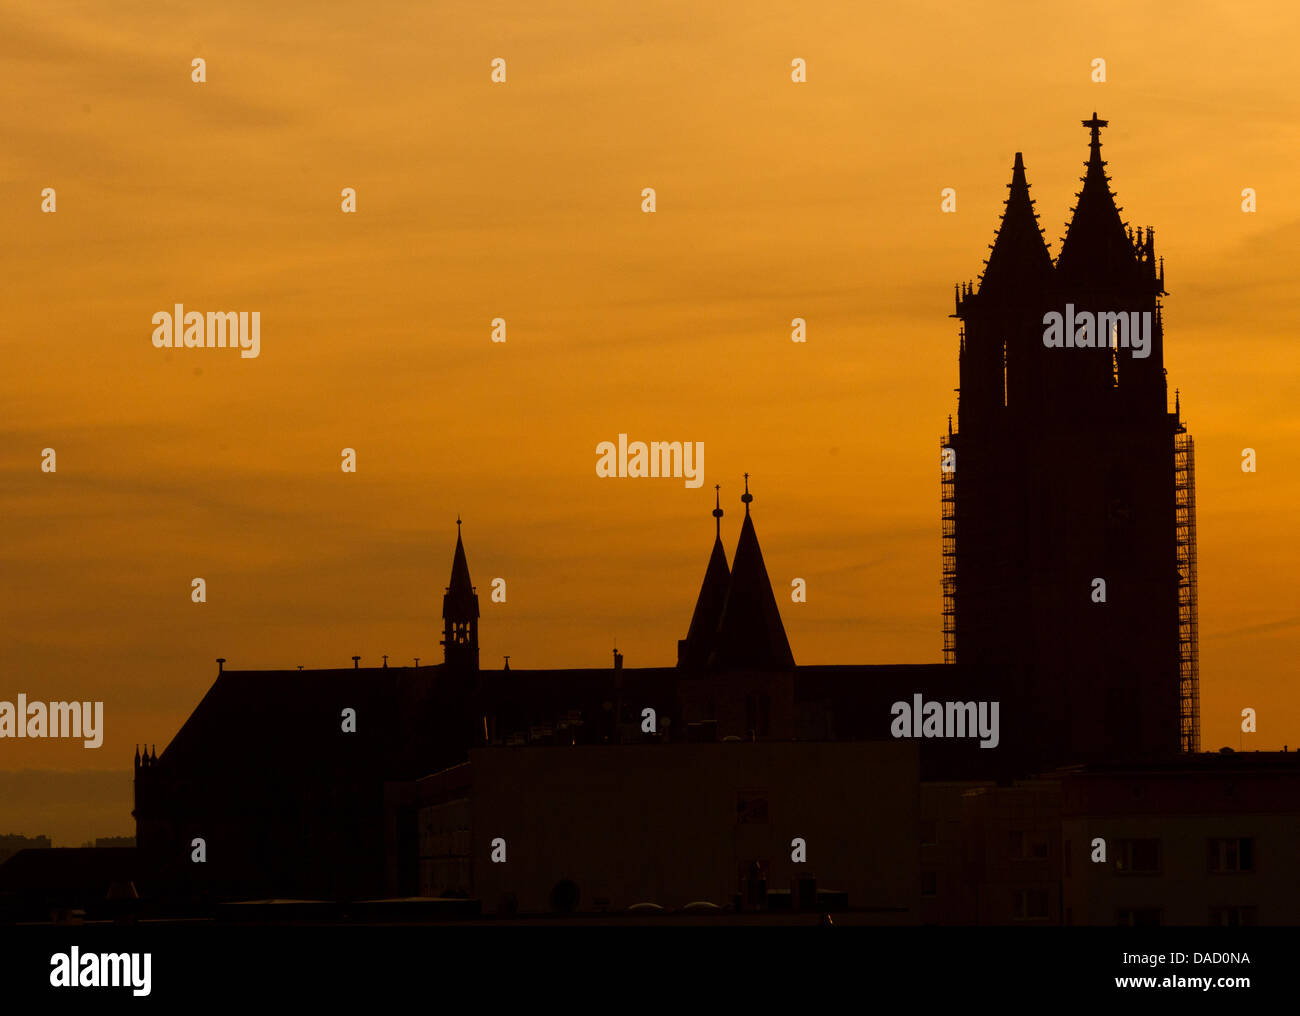 The thick double church towers of the Cathedral of Saints Catherine and Maurice and the towers of the 'Our Lady' Monastery are seen during dusk in Magdeburg, Germany, 28 December 2011. After a sunny day meteorologists predict new rainfalls. Photo: Jens Wolf Stock Photo